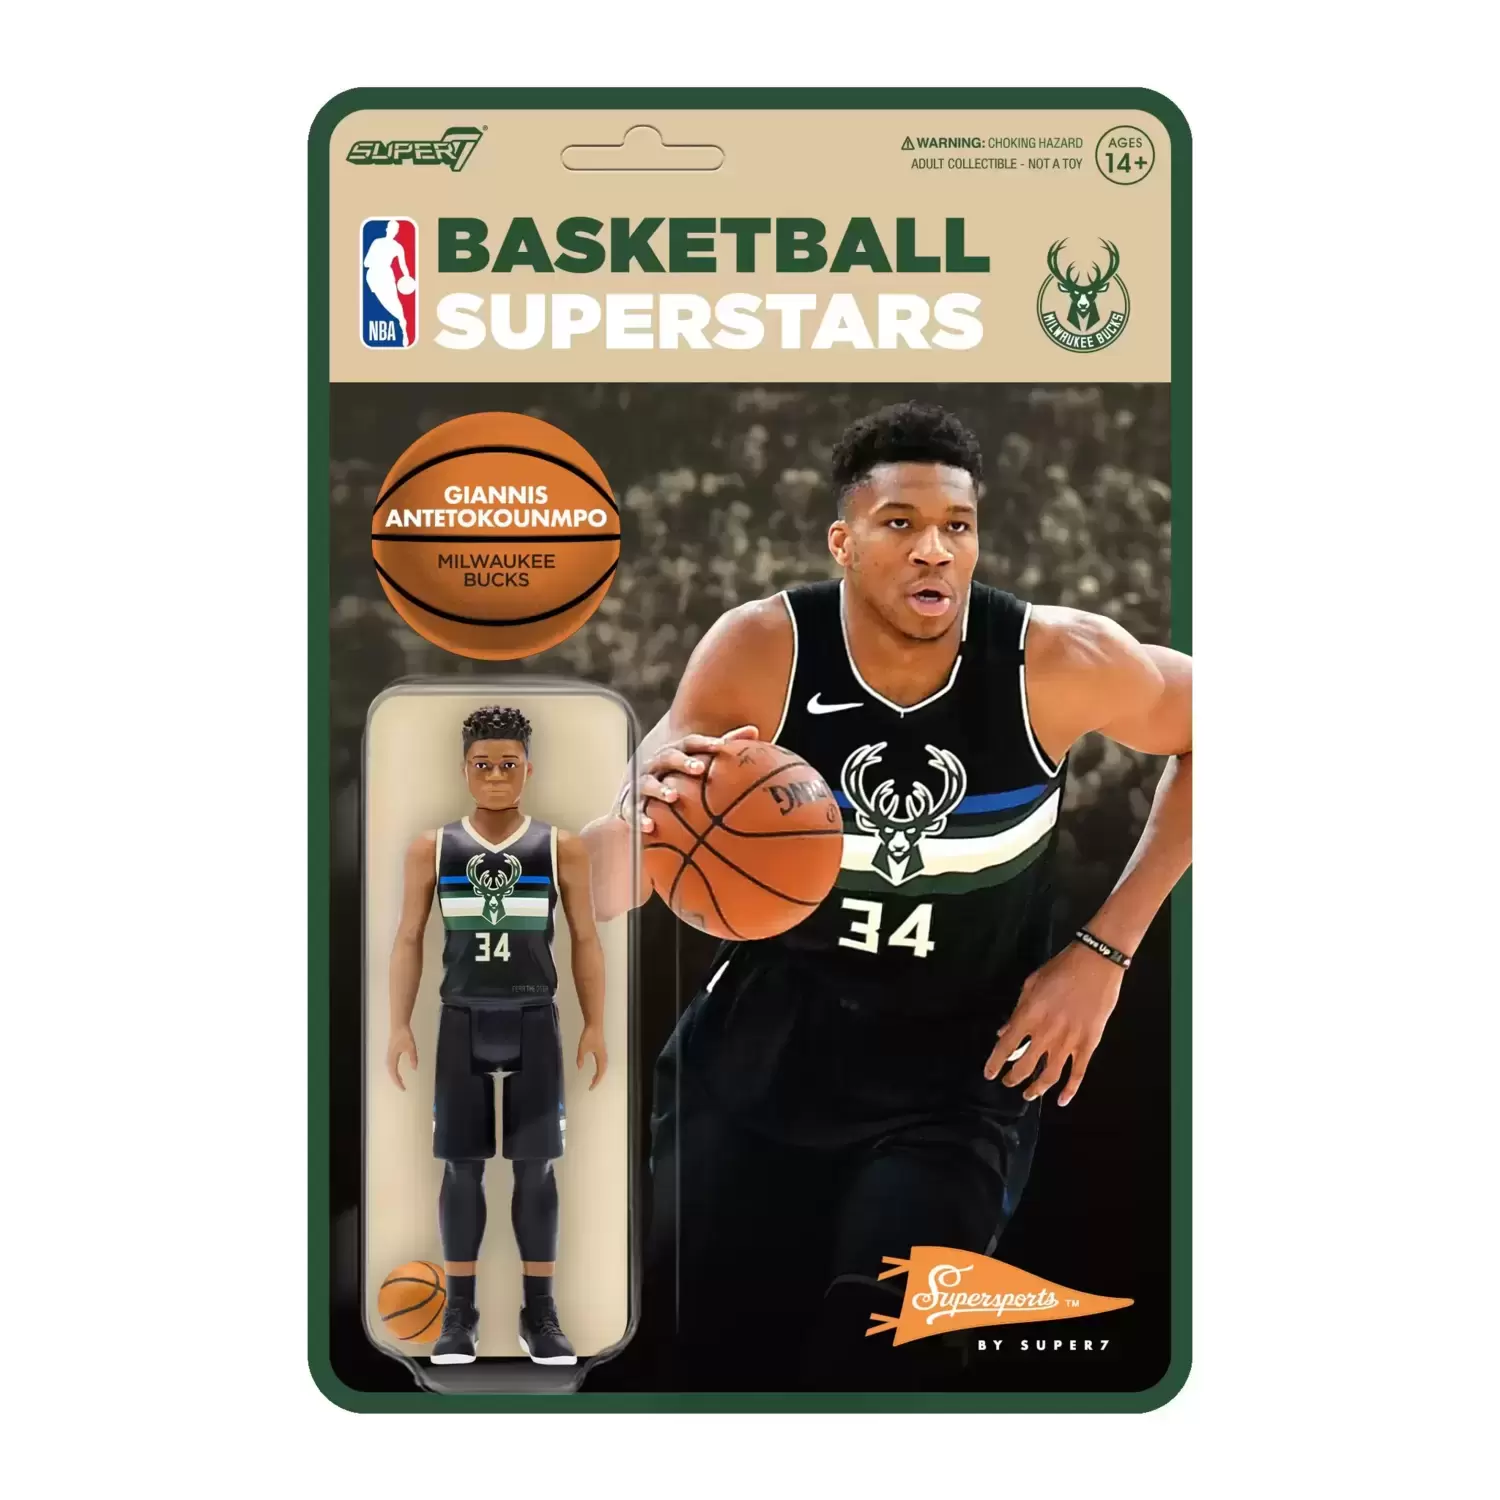 Supersports by Super7 - Basketball - Giannis Antentokuompo (Bucks) [Black Statement]